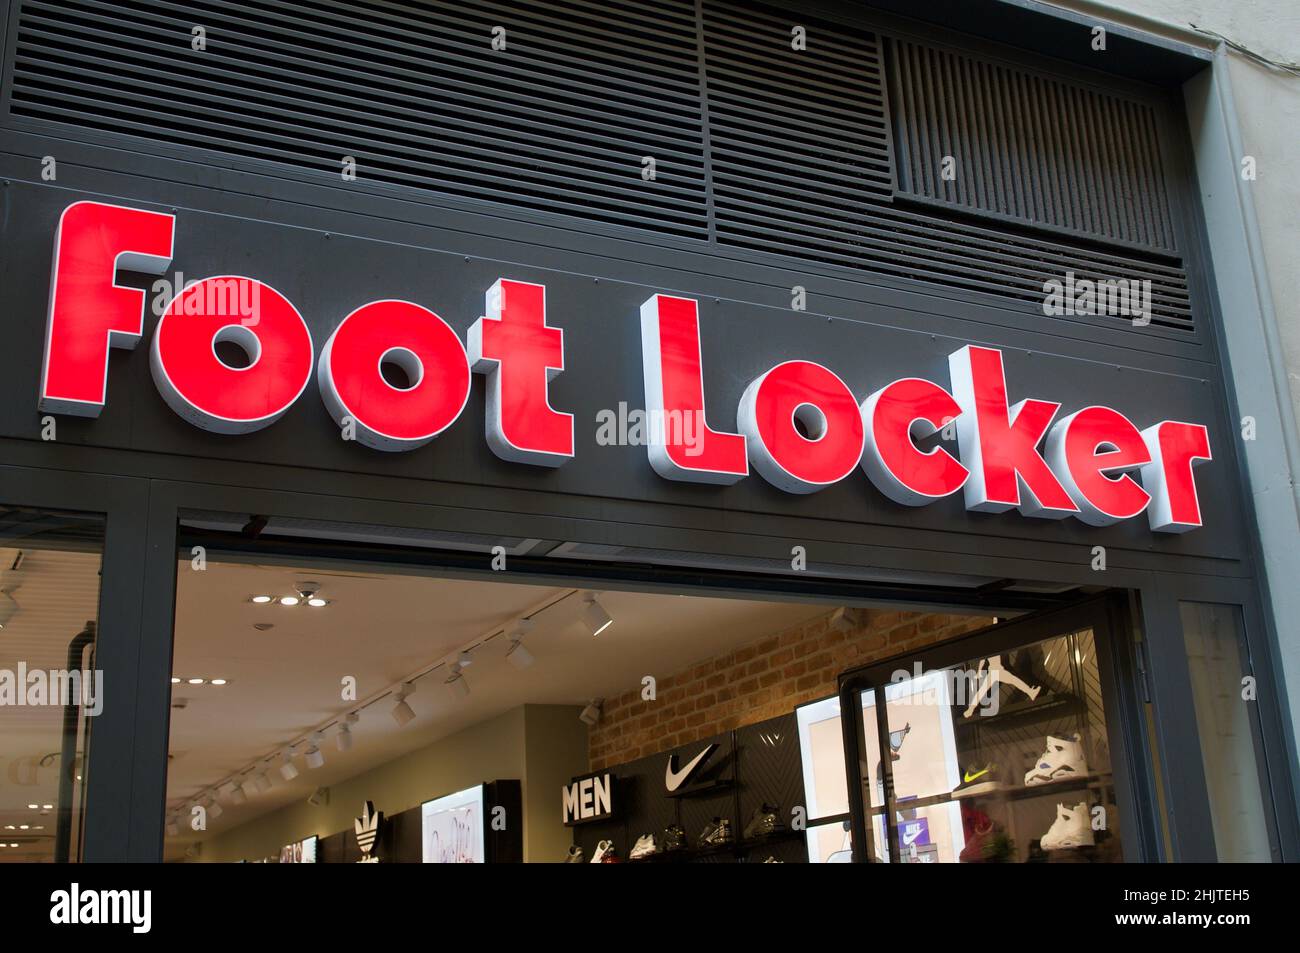 Firenze, Tuscany, Italy - 27th September 2021 : Foot Locker sign hanging over a store in Florence, Italy. Foot Locker Retail, Inc. is an American spor Stock Photo